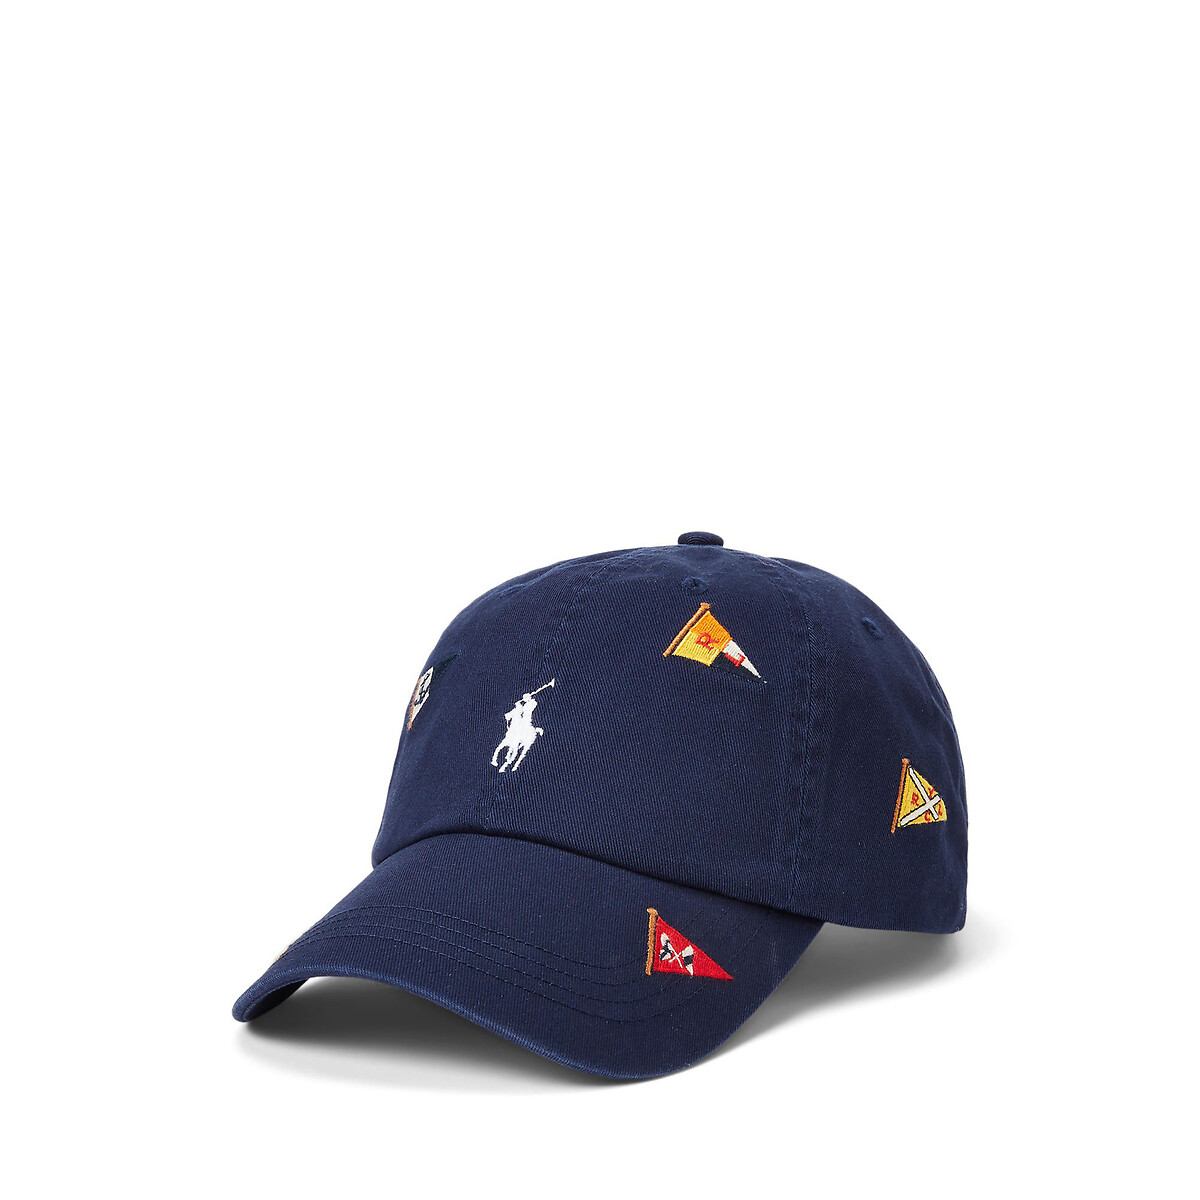 Image of Cotton Classic Sports Cap with Embroidered Logos